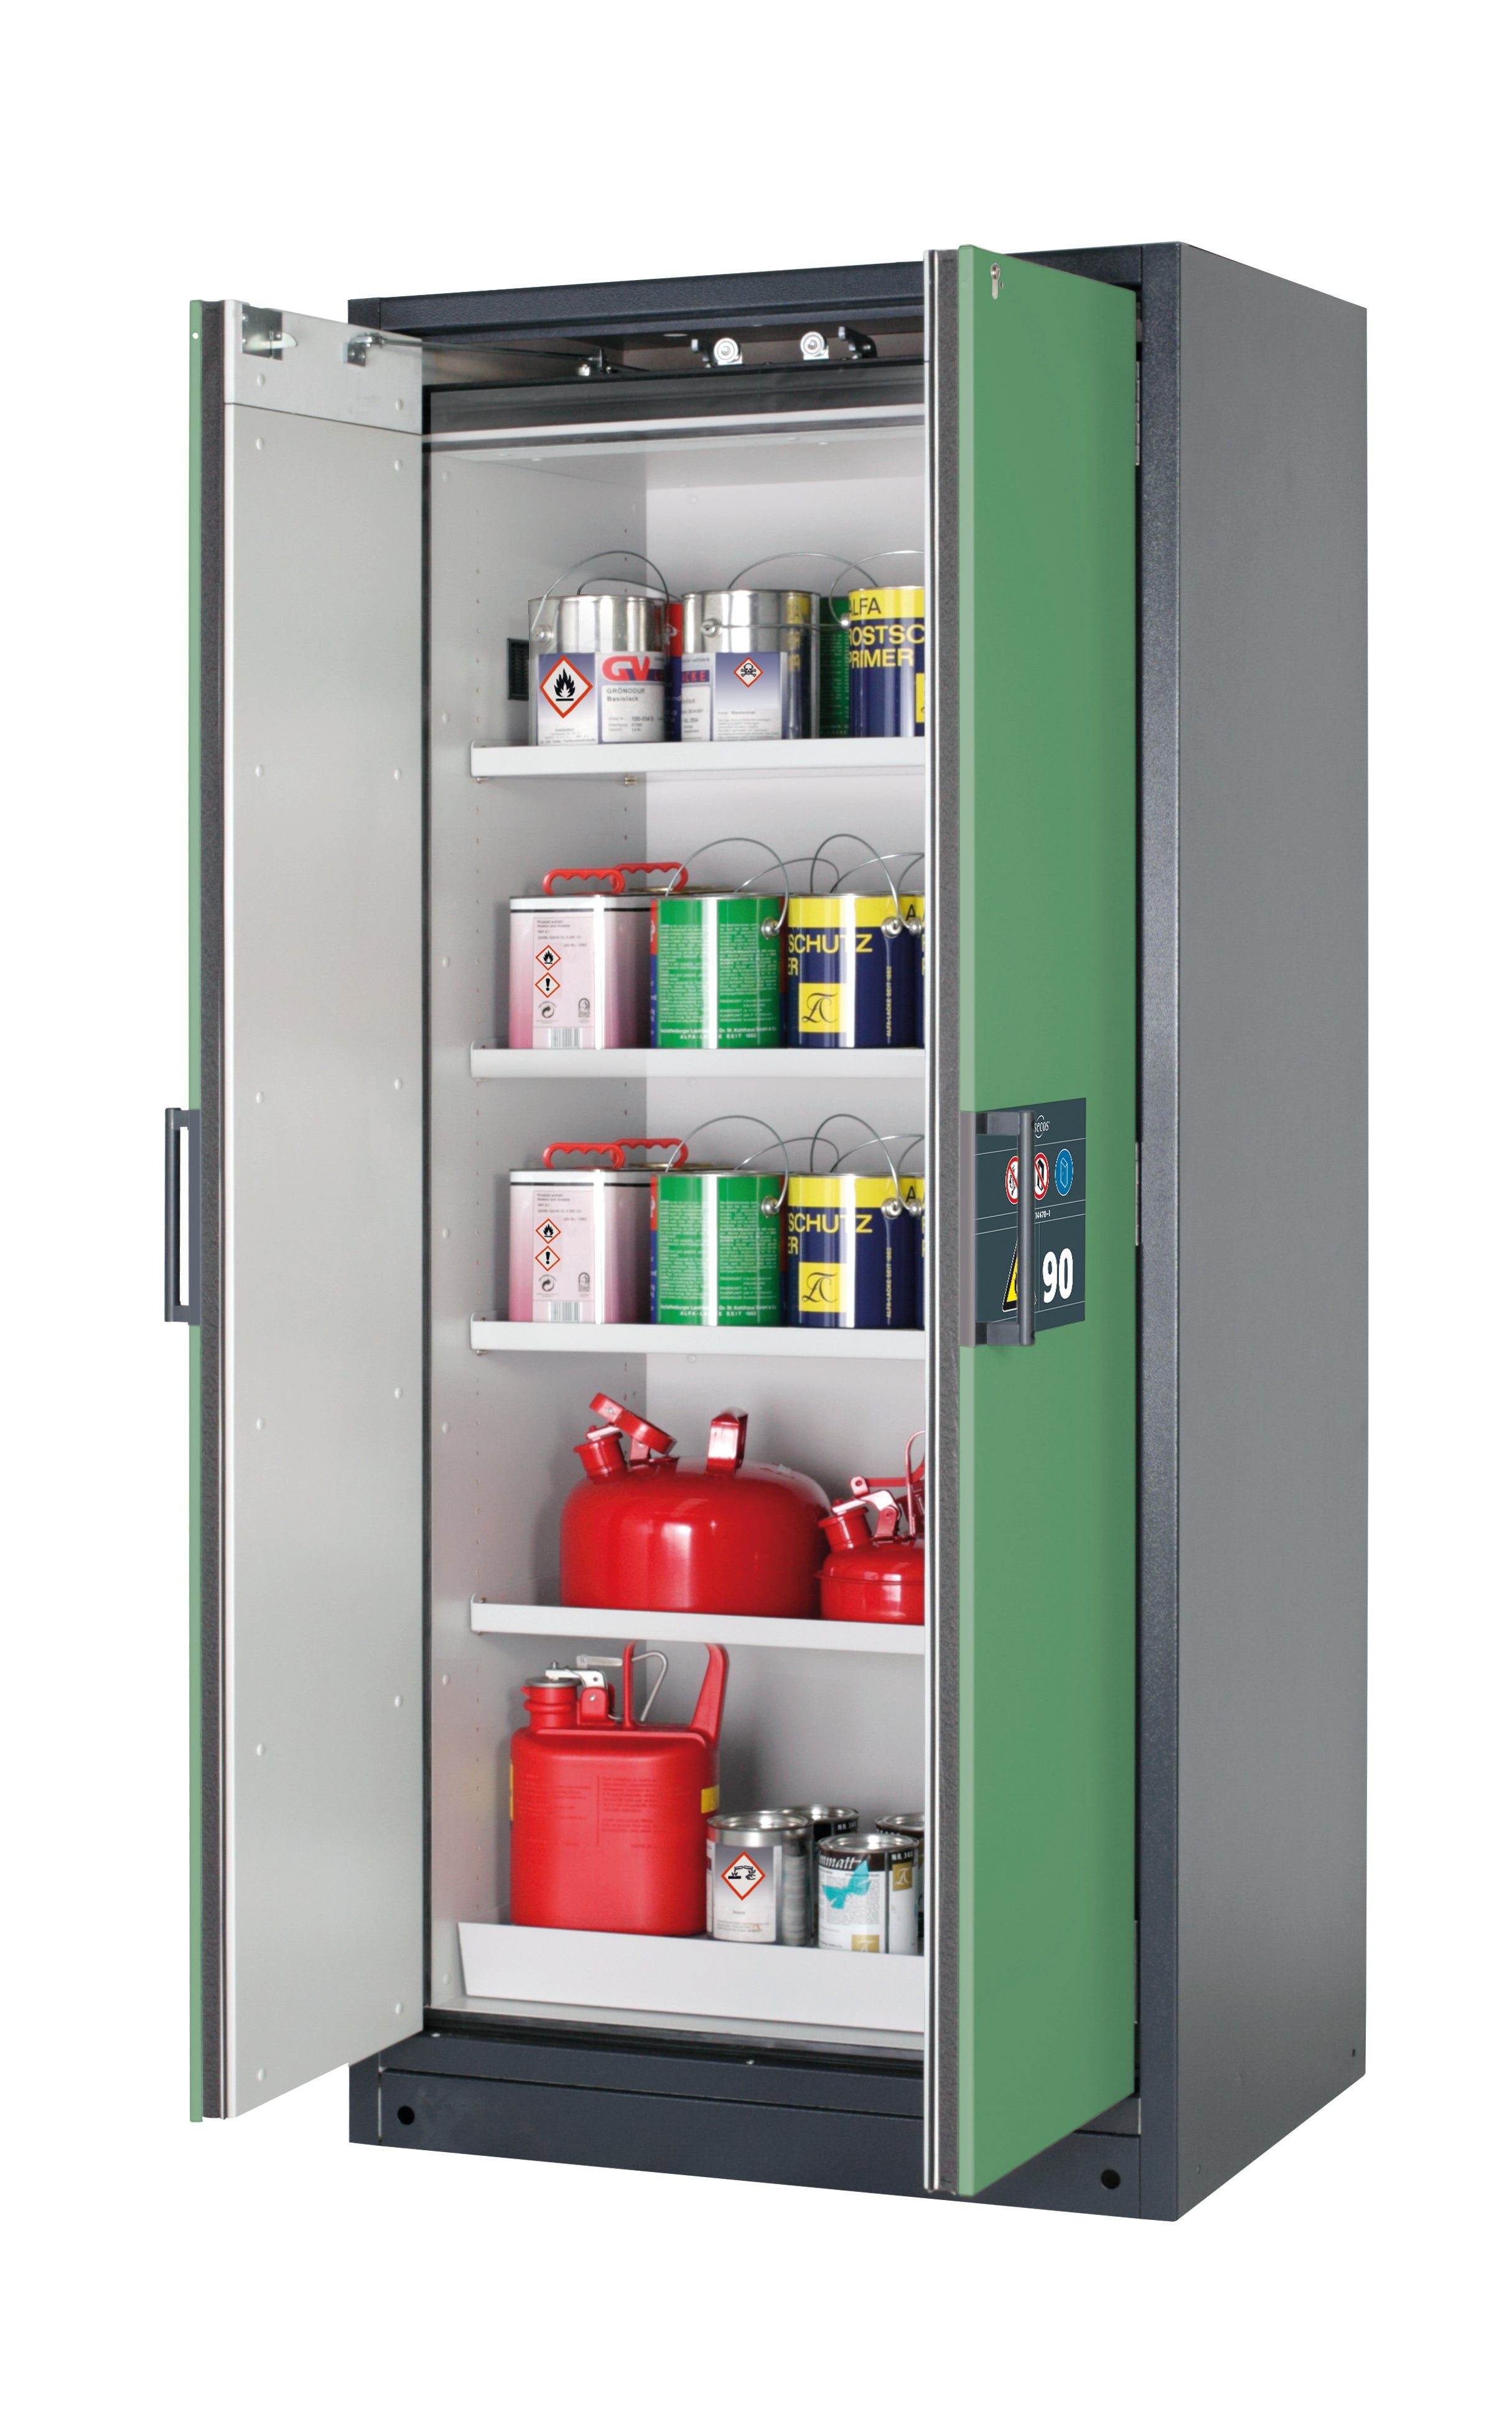 Type 90 safety storage cabinet Q-CLASSIC-90 model Q90.195.090 in reseda green RAL 6011 with 4x shelf standard (sheet steel),